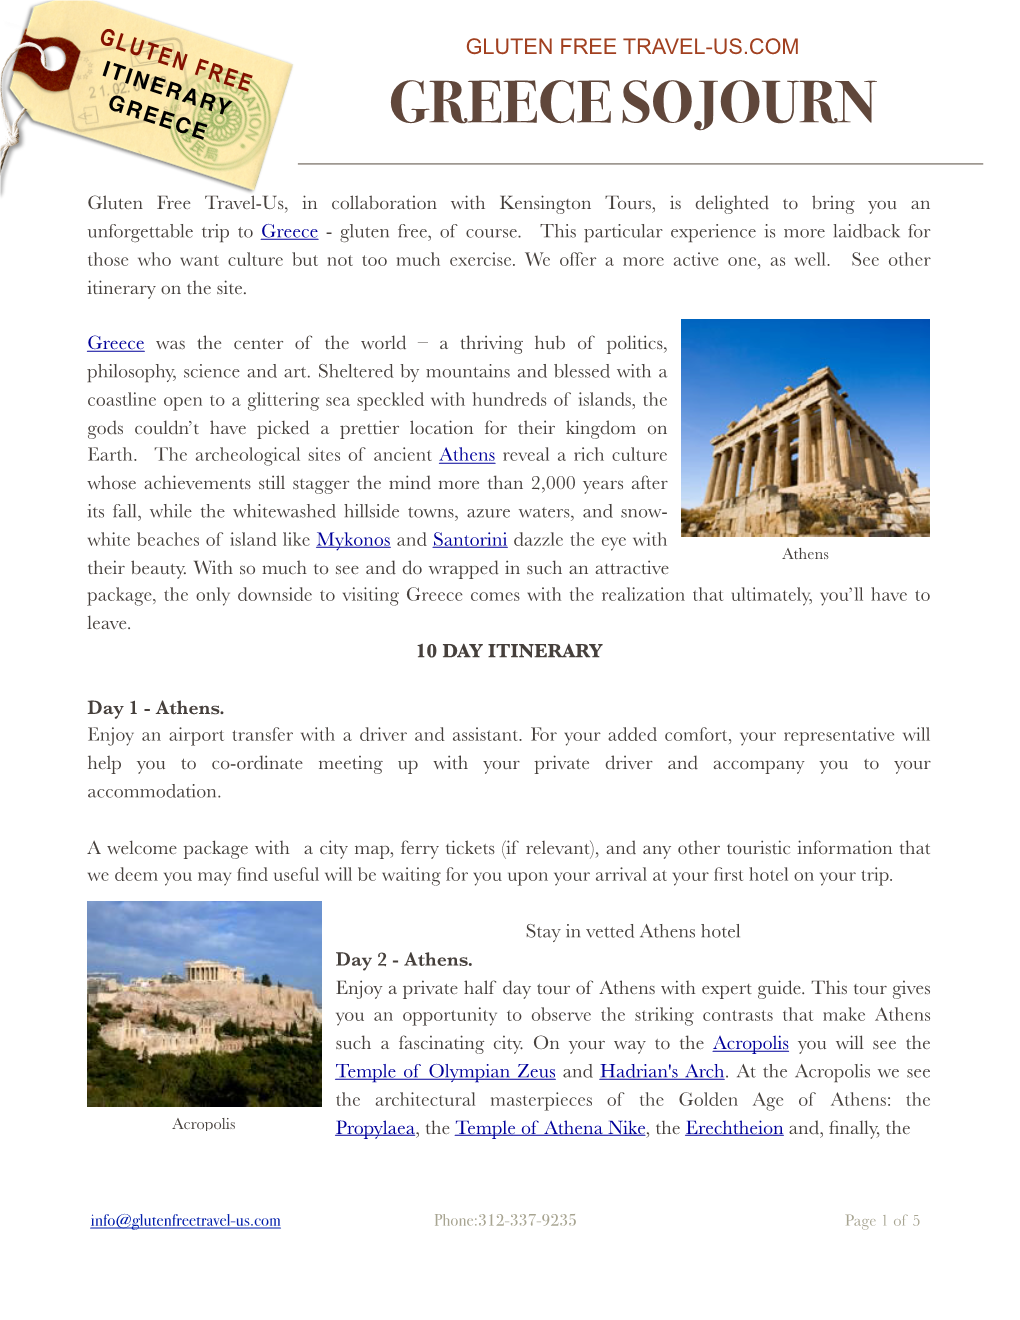 GREECE SOJOURN Laidback Itinerary